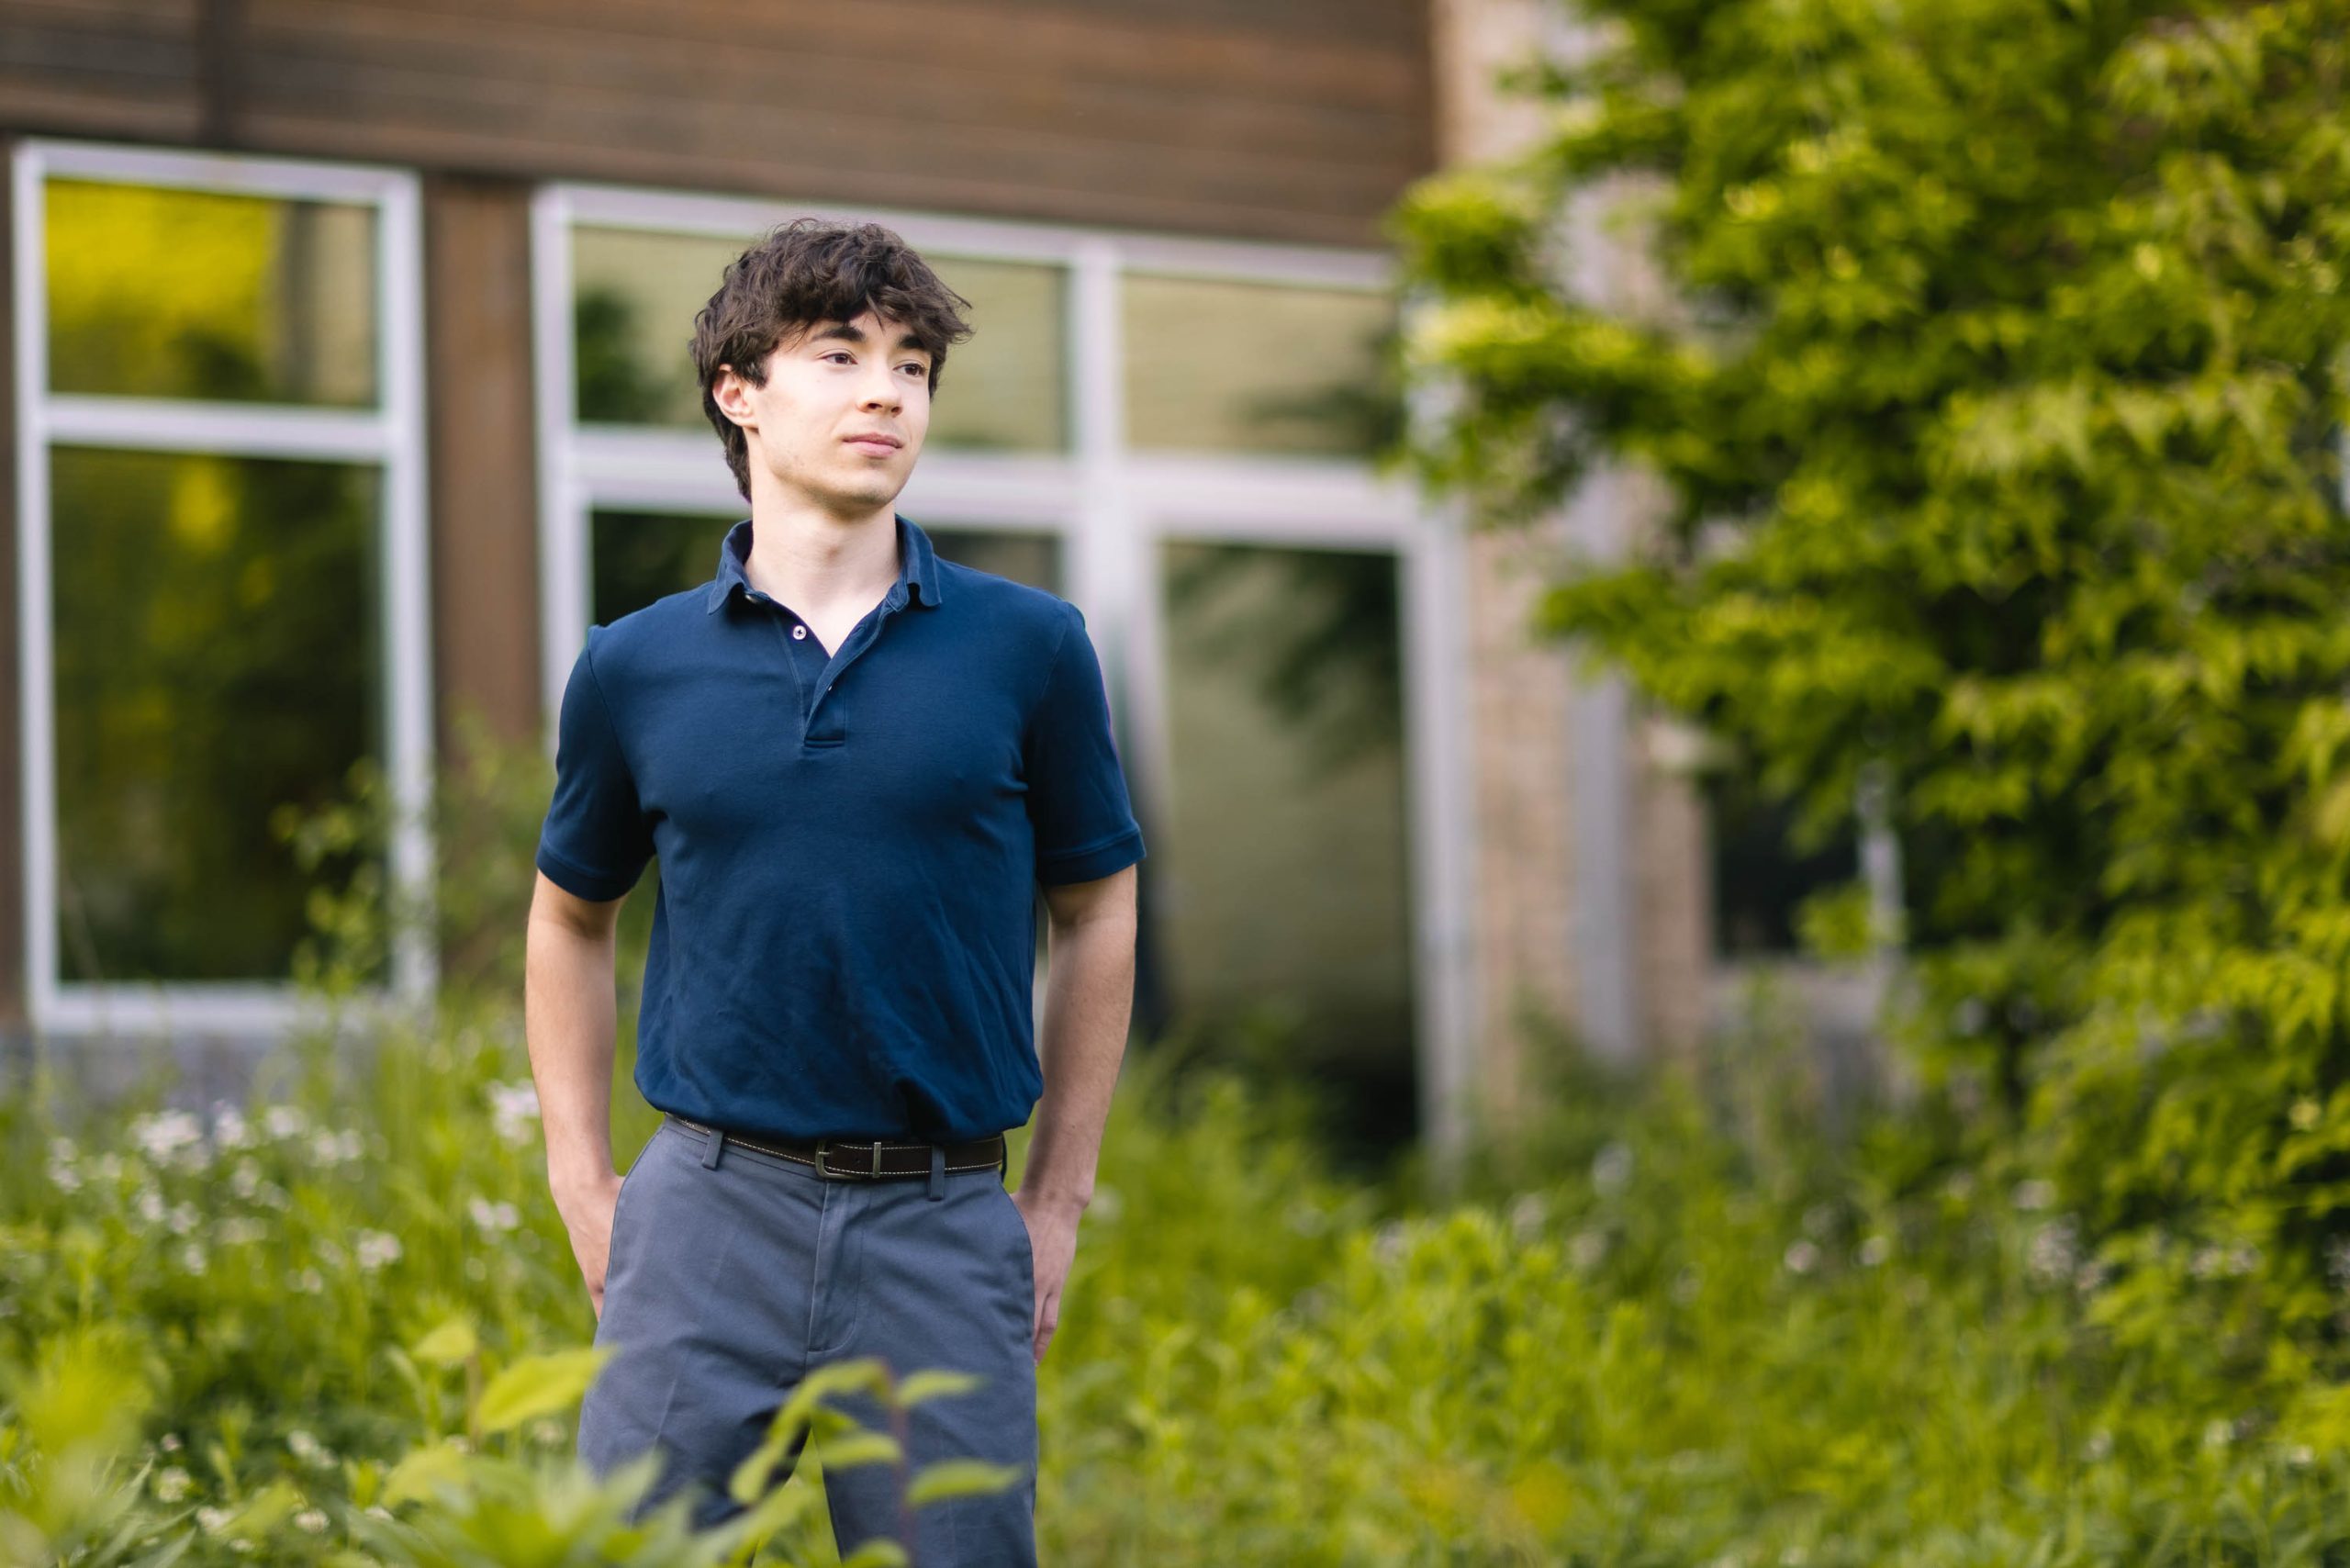 A young man in a blue shirt standing in front of a high school building.